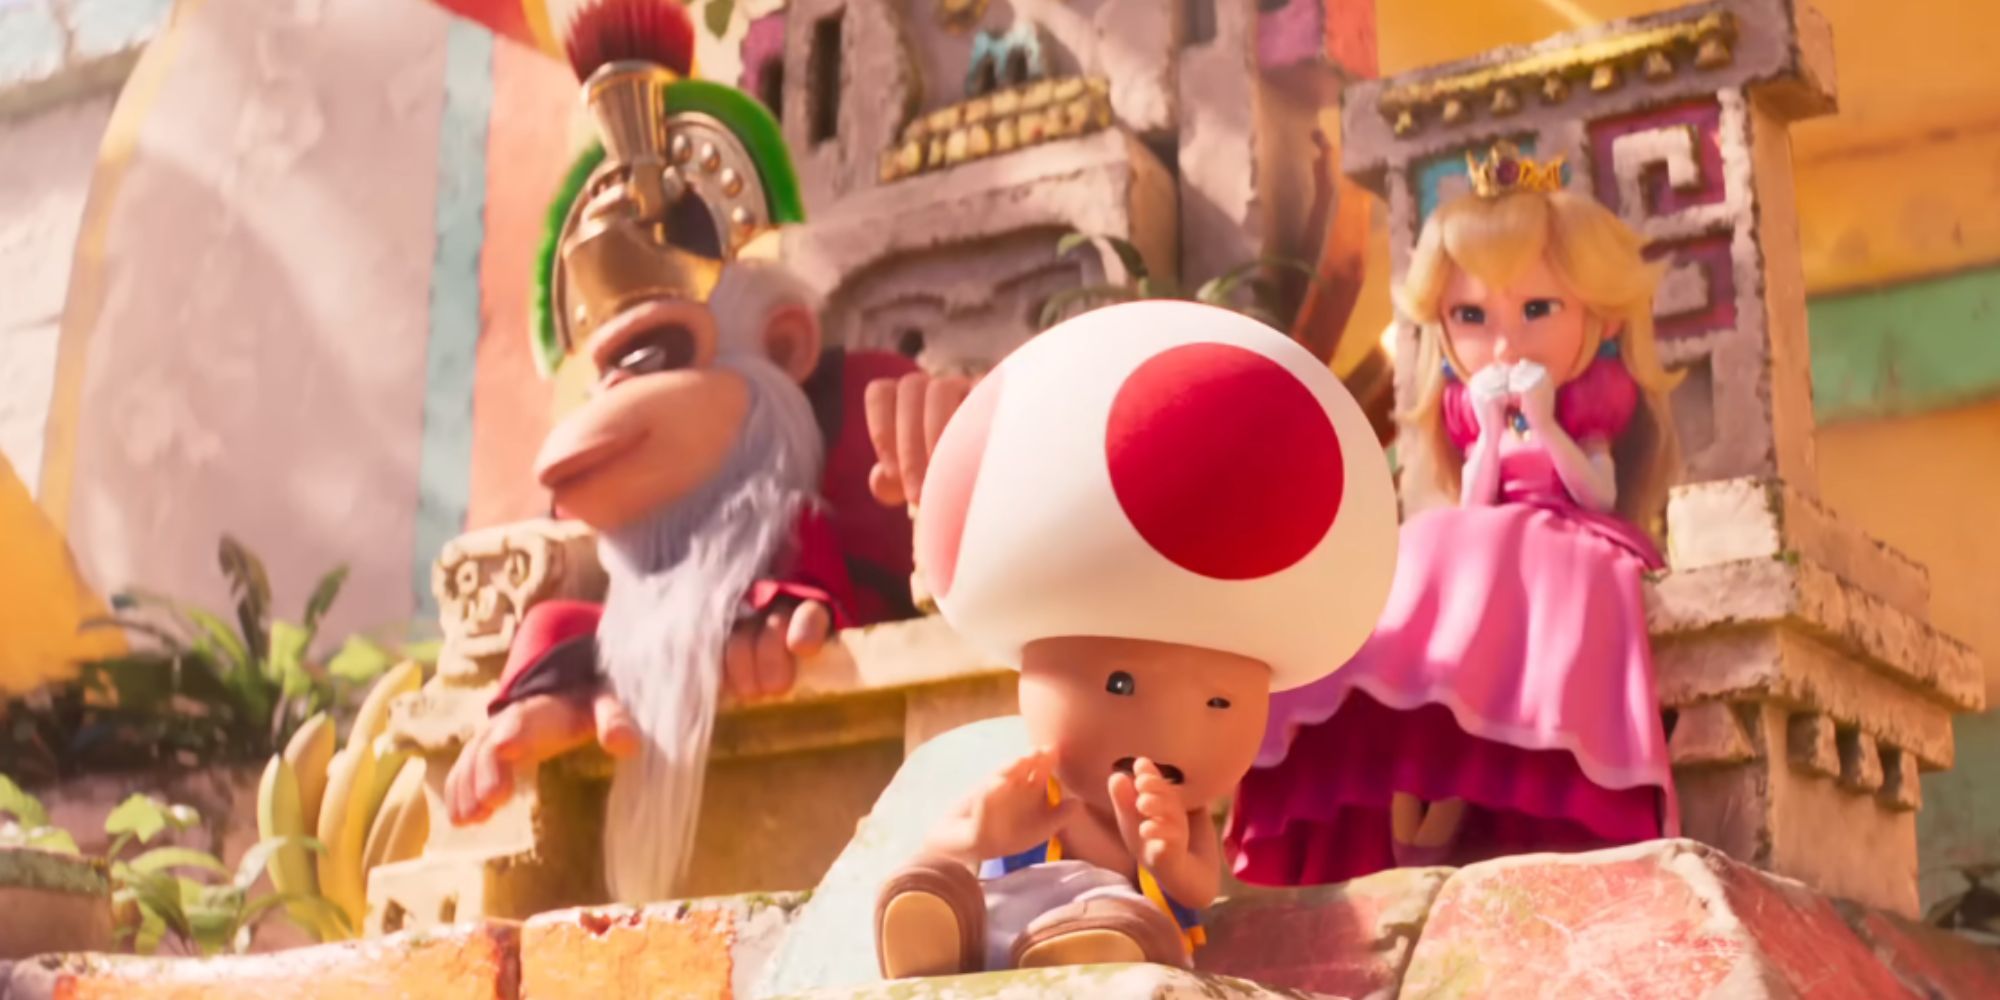 Toad and Princess Peach flinch while Cranky Kong looks away in The Super Mario Bros. Movie